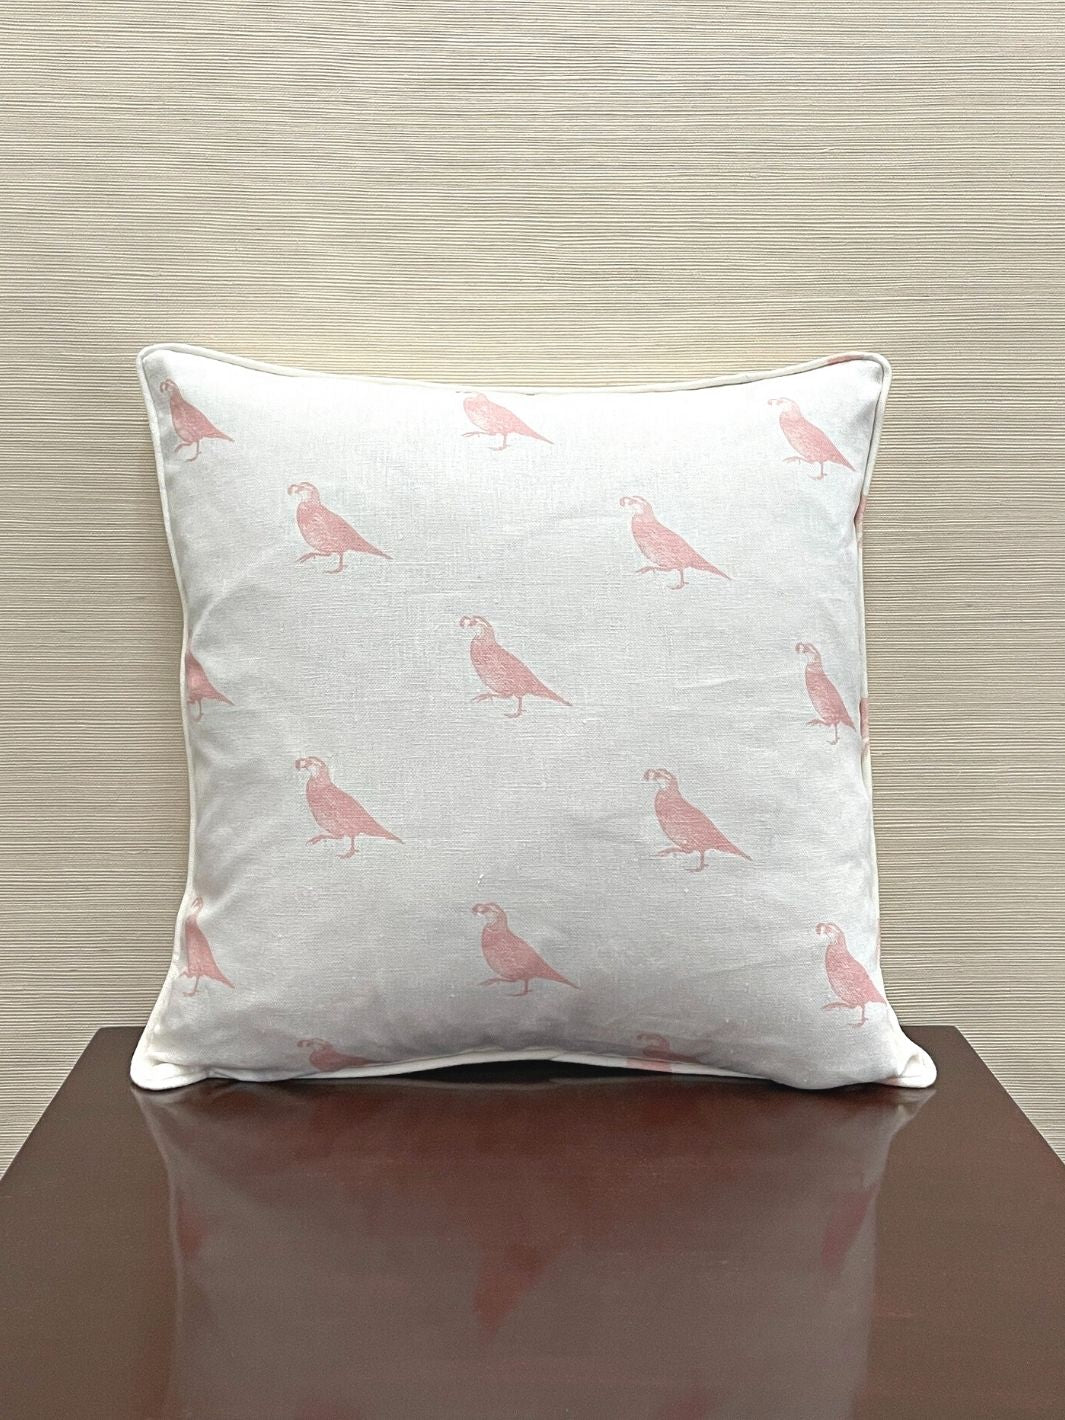 'California Quail' Throw Pillow by Nathan Turner 18x18 - Pink on Linen